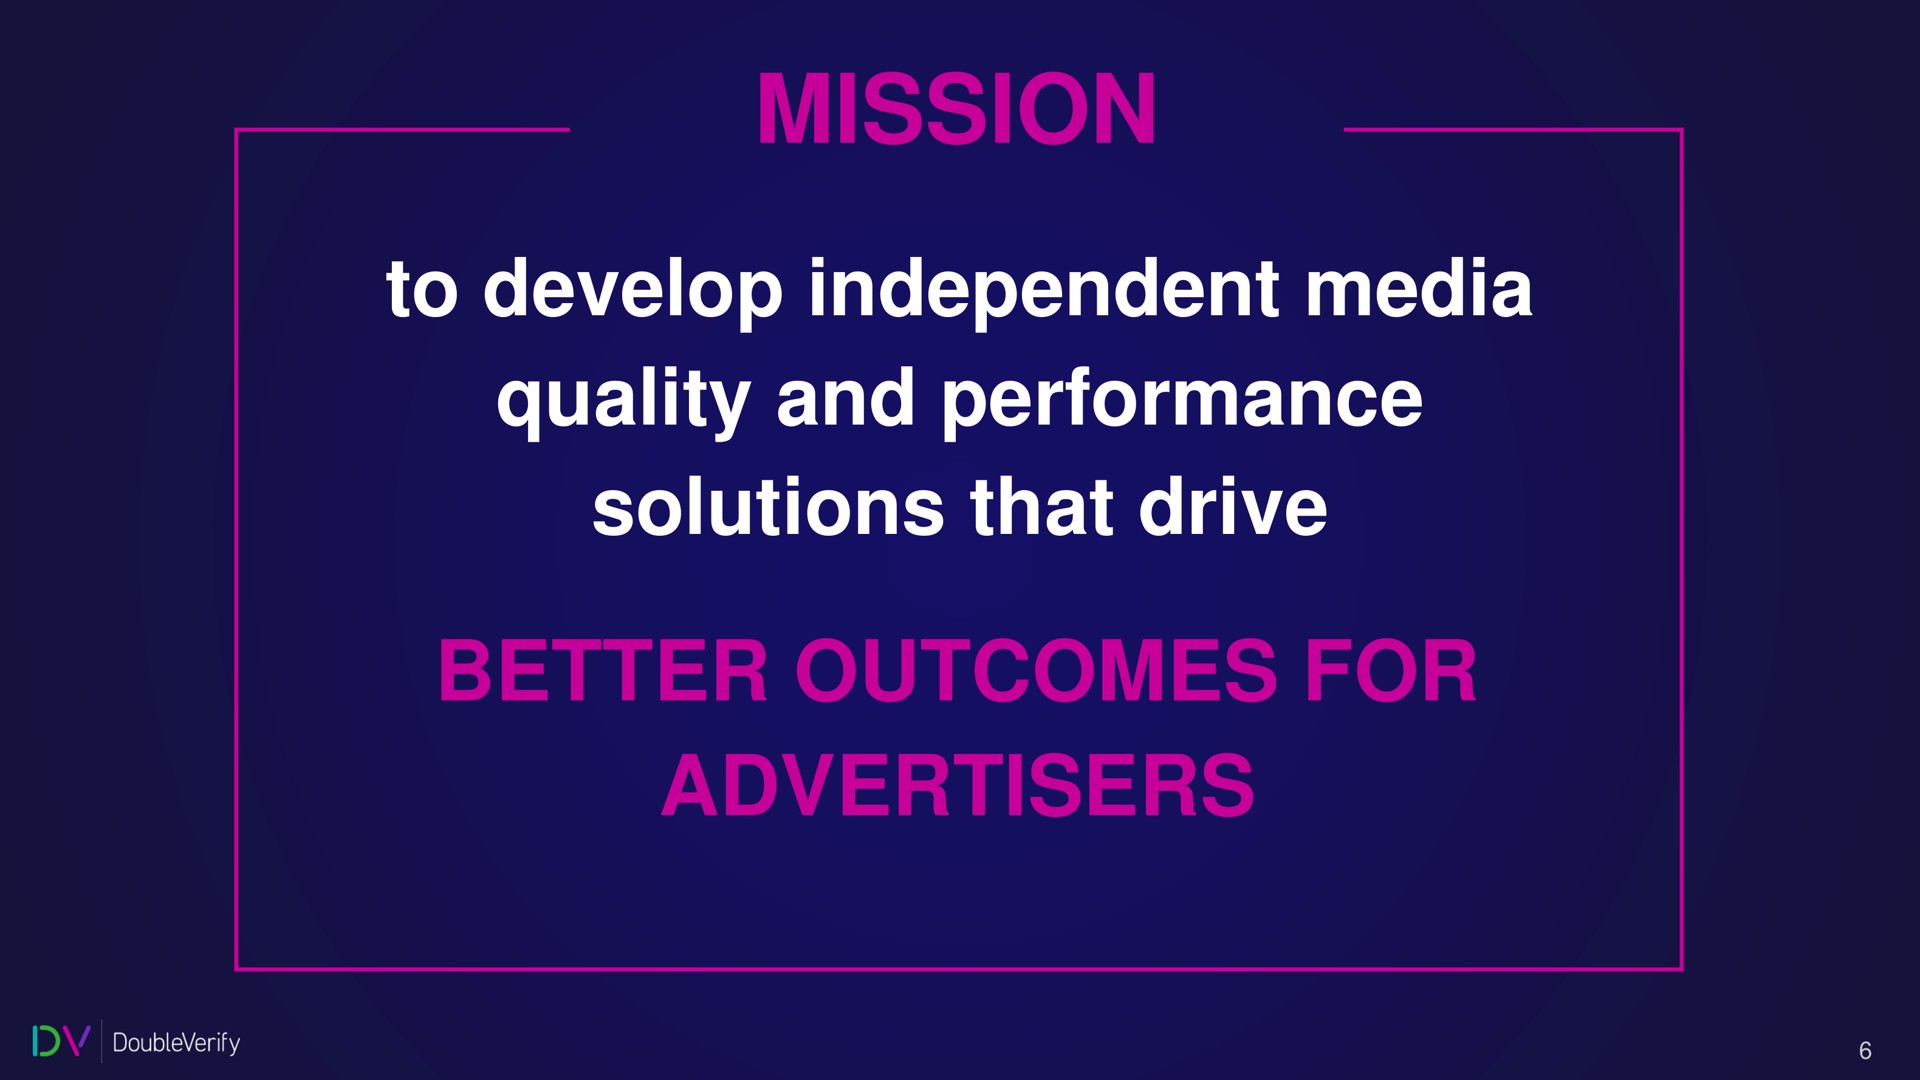 mission to develop independent media quality and performance solutions that drive better outcomes for advertisers | DoubleVerify